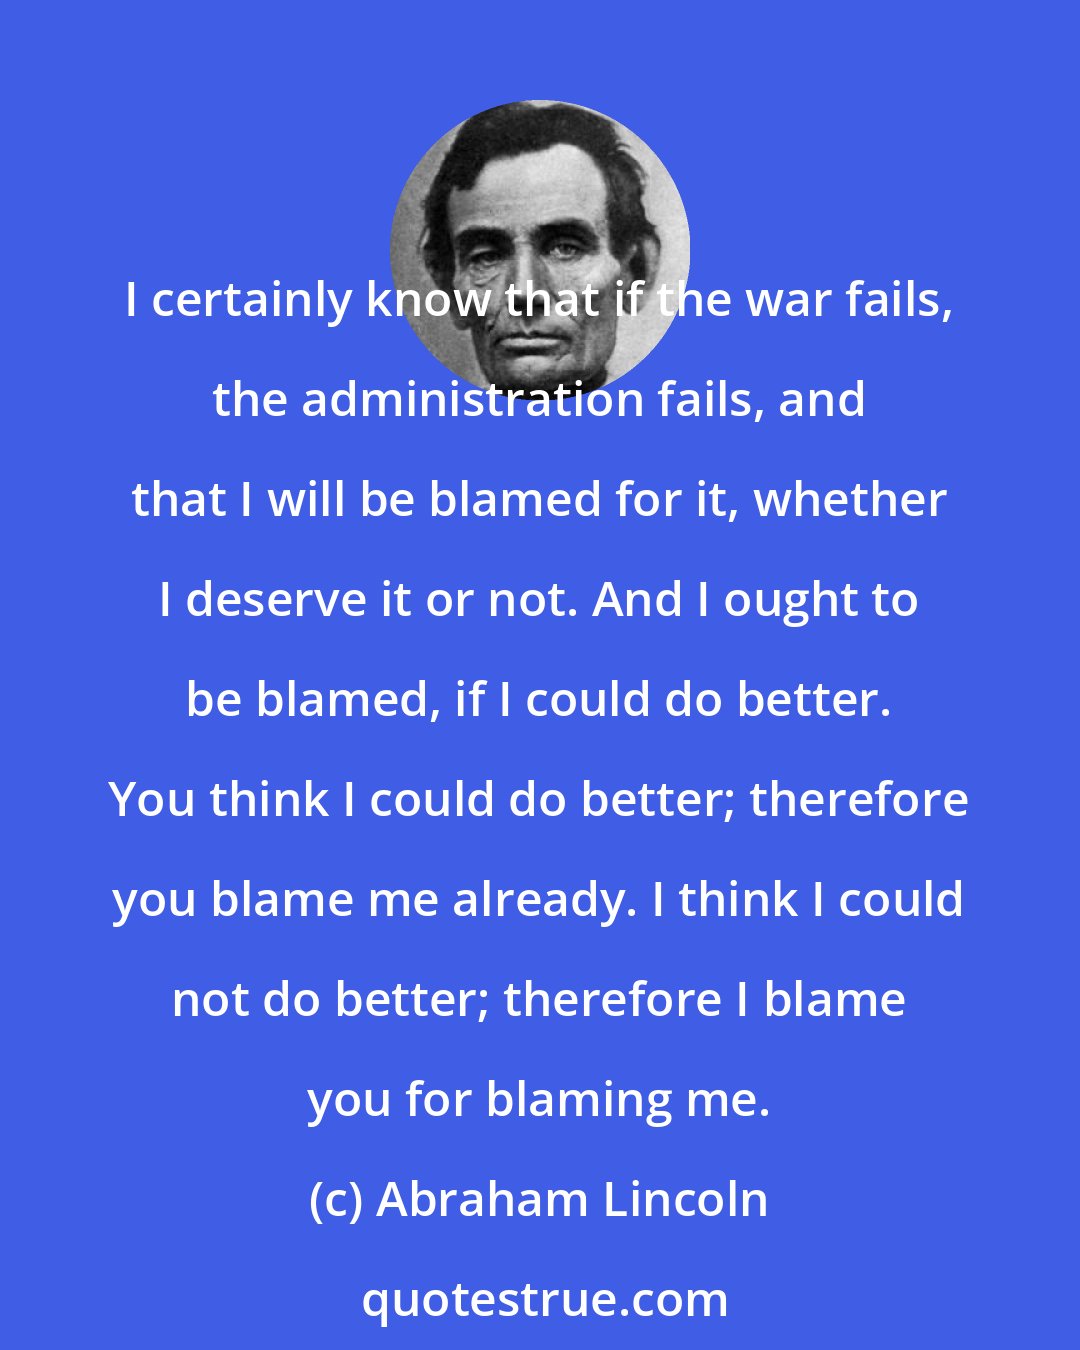 Abraham Lincoln: I certainly know that if the war fails, the administration fails, and that I will be blamed for it, whether I deserve it or not. And I ought to be blamed, if I could do better. You think I could do better; therefore you blame me already. I think I could not do better; therefore I blame you for blaming me.